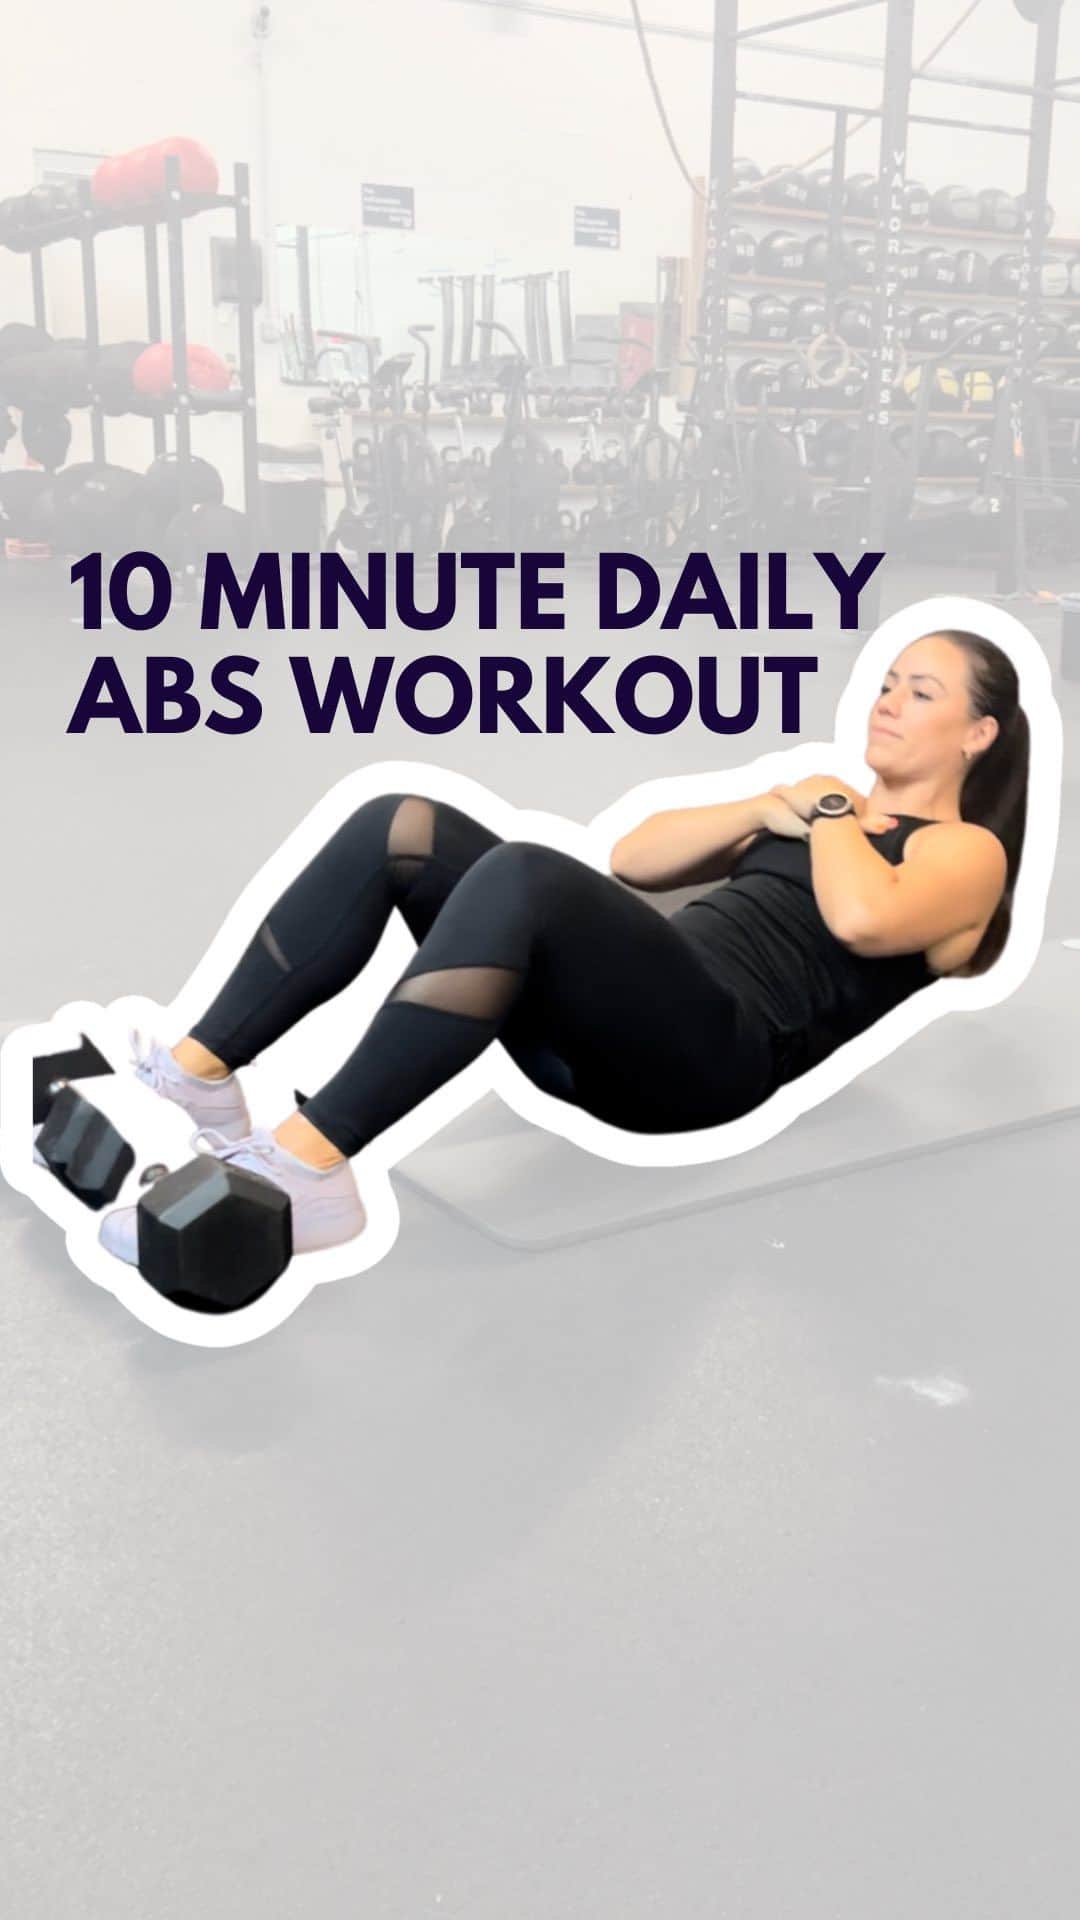 Camille Leblanc-Bazinetのインスタグラム：「The DAILY ABS Program begins Monday!😎Here’s a sneak peak at the first workout ⬇️  Anchored Weighted Sit-Ups  Anchor your feet with two heavy dumbbells and hold a weight on your chest. Choose a challenging load that still allows you to get all the repetitions in.   3 sets  20 weighted sit-ups directly into 40 unweighted abs pulse  rest 90 sec between set  Note: Once the 20 repetitions are done, drop the load and execute 40 pulse where you stay under tension all the way through. Enjoy the burn and record load used.  👯‍♀️Grab a friend or do it solo - these daily ab finishers are designed to give you a stronger sculpted core in only 10 minutes or less.  🦄 $10/month gets you access to our Feroce Fitness app and 5 new ab workouts every week. 🙌   LINK IN BIO.  #abworkout #abs #coreworkout」